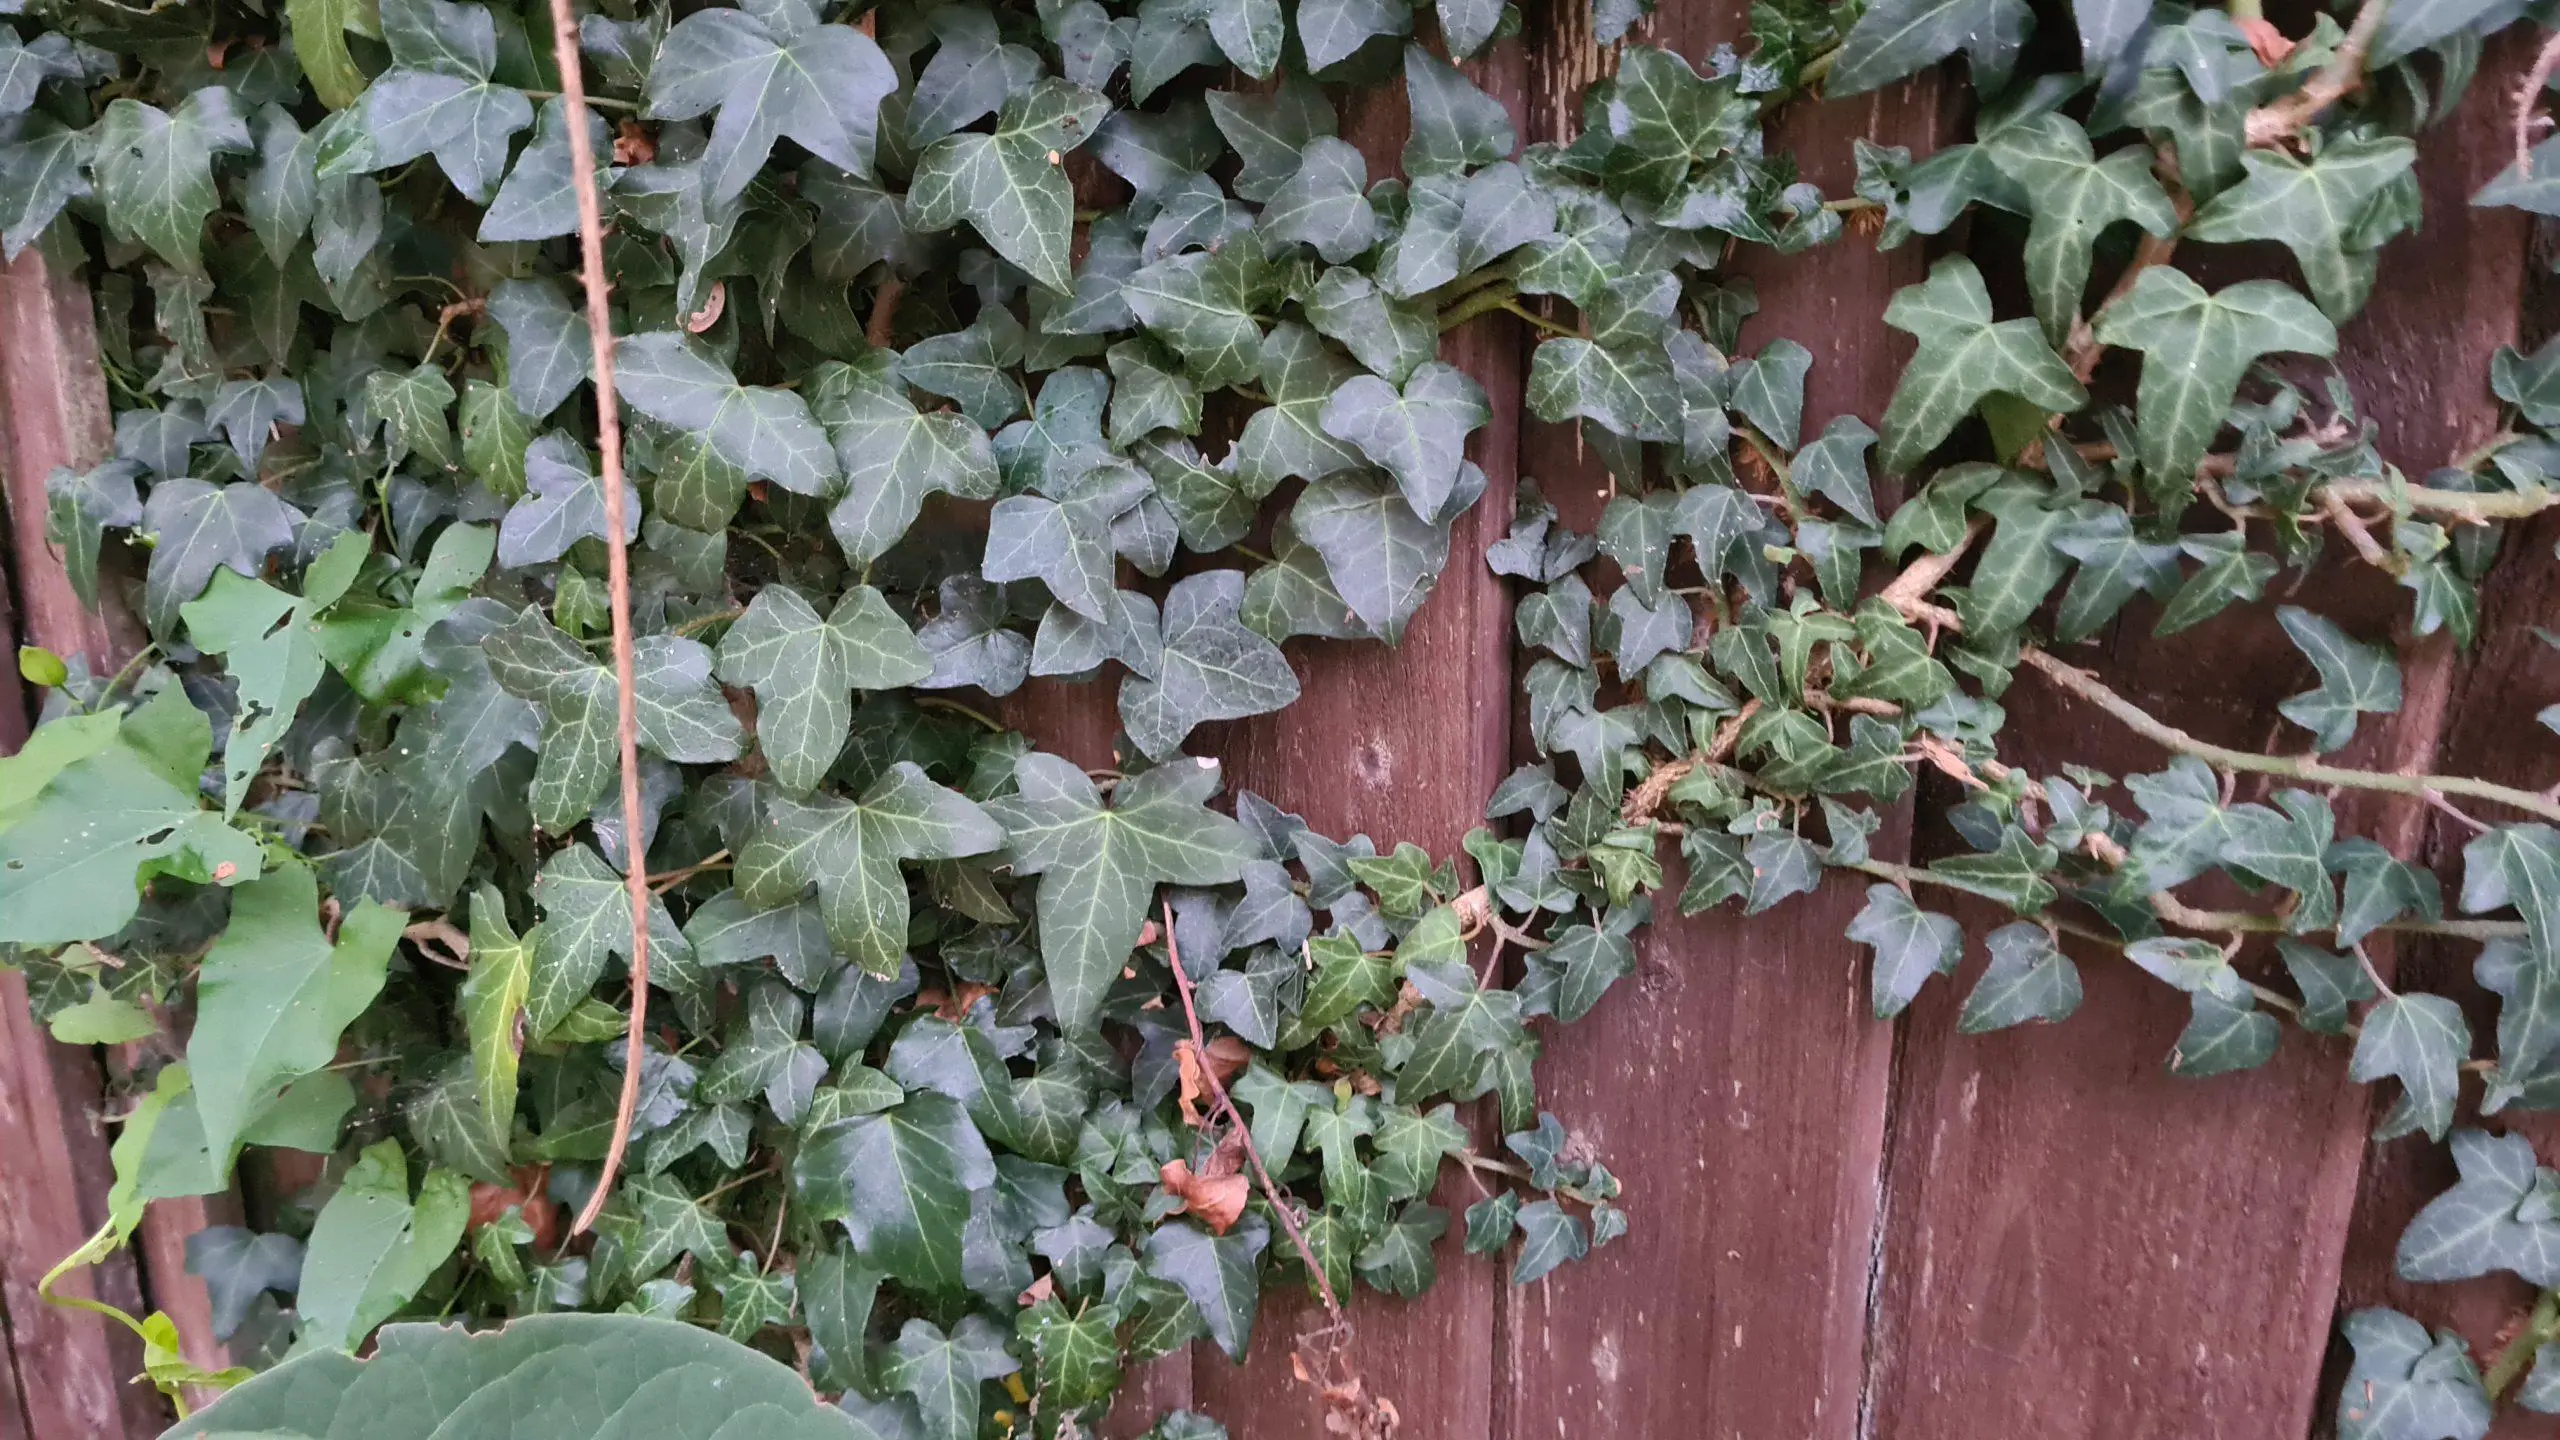 English Ivy clinging to a fence and consuming it